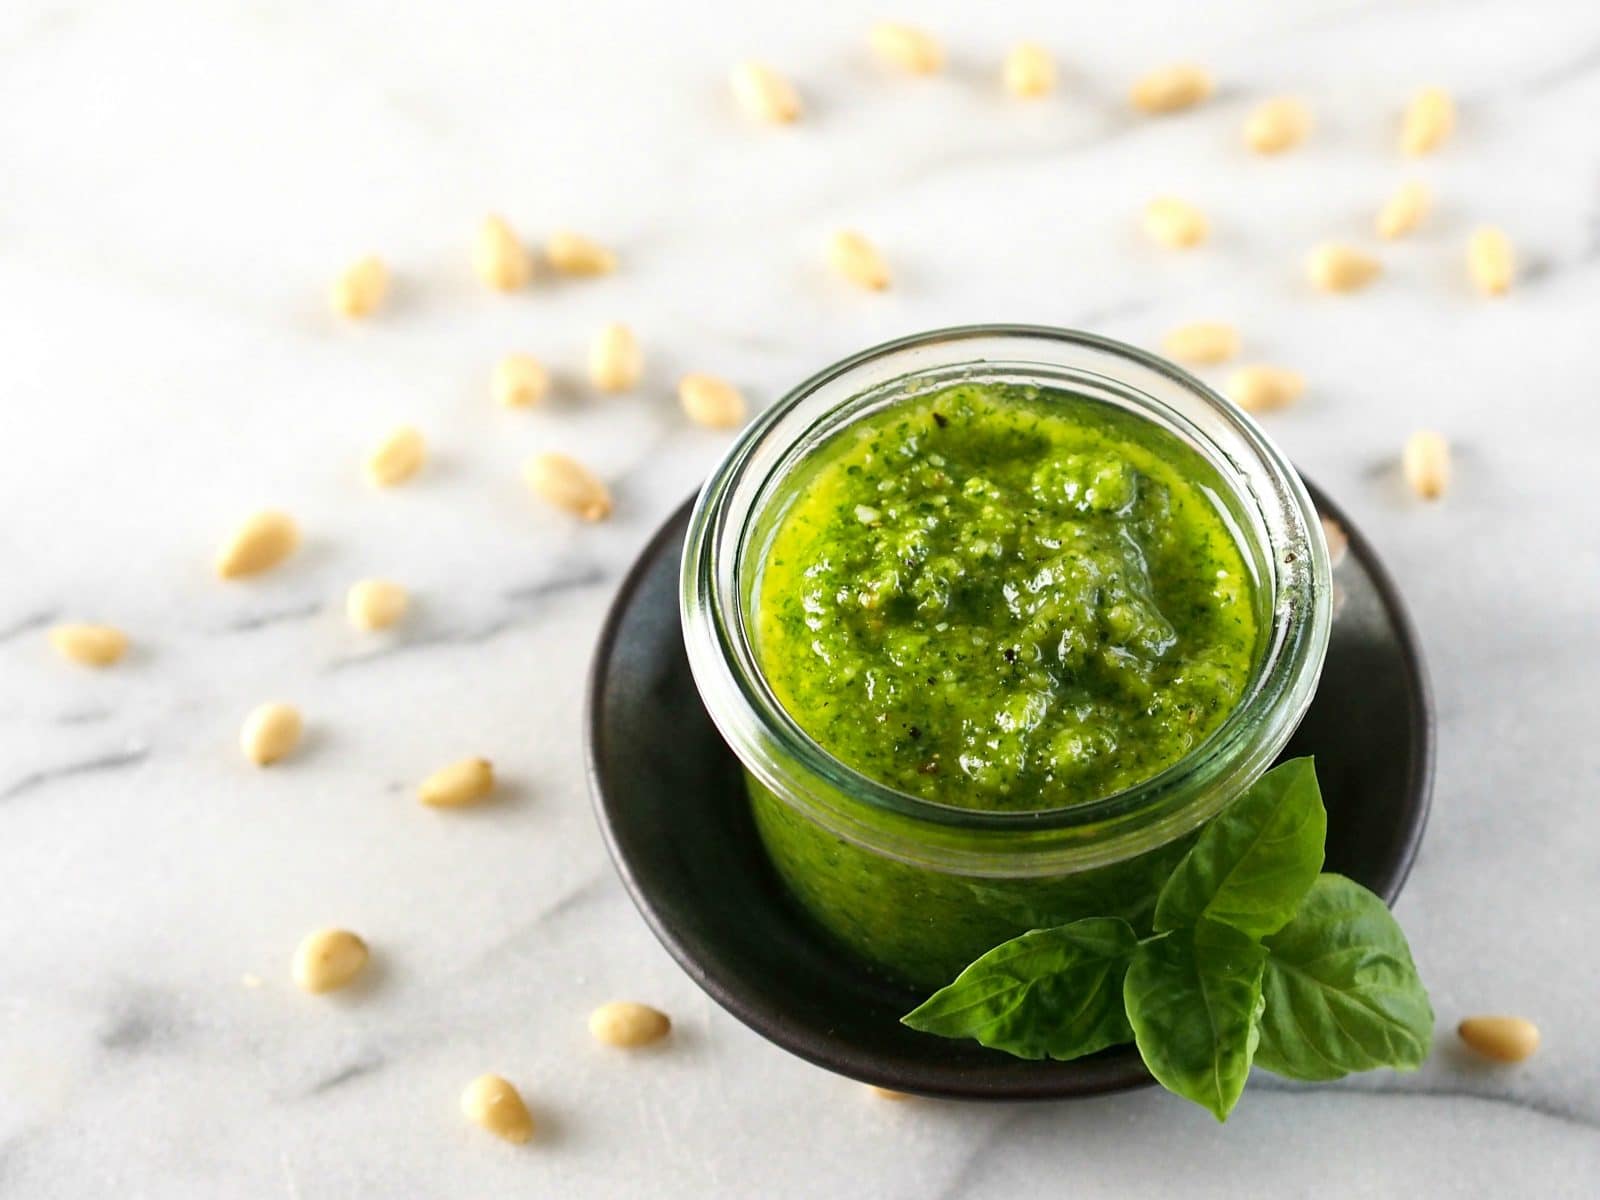 Basic Pesto. The perfect pesto recipe to use as the base to create your favorite pesto - just substitute other greens, nuts, cheeses and seasonings. Simply Sated